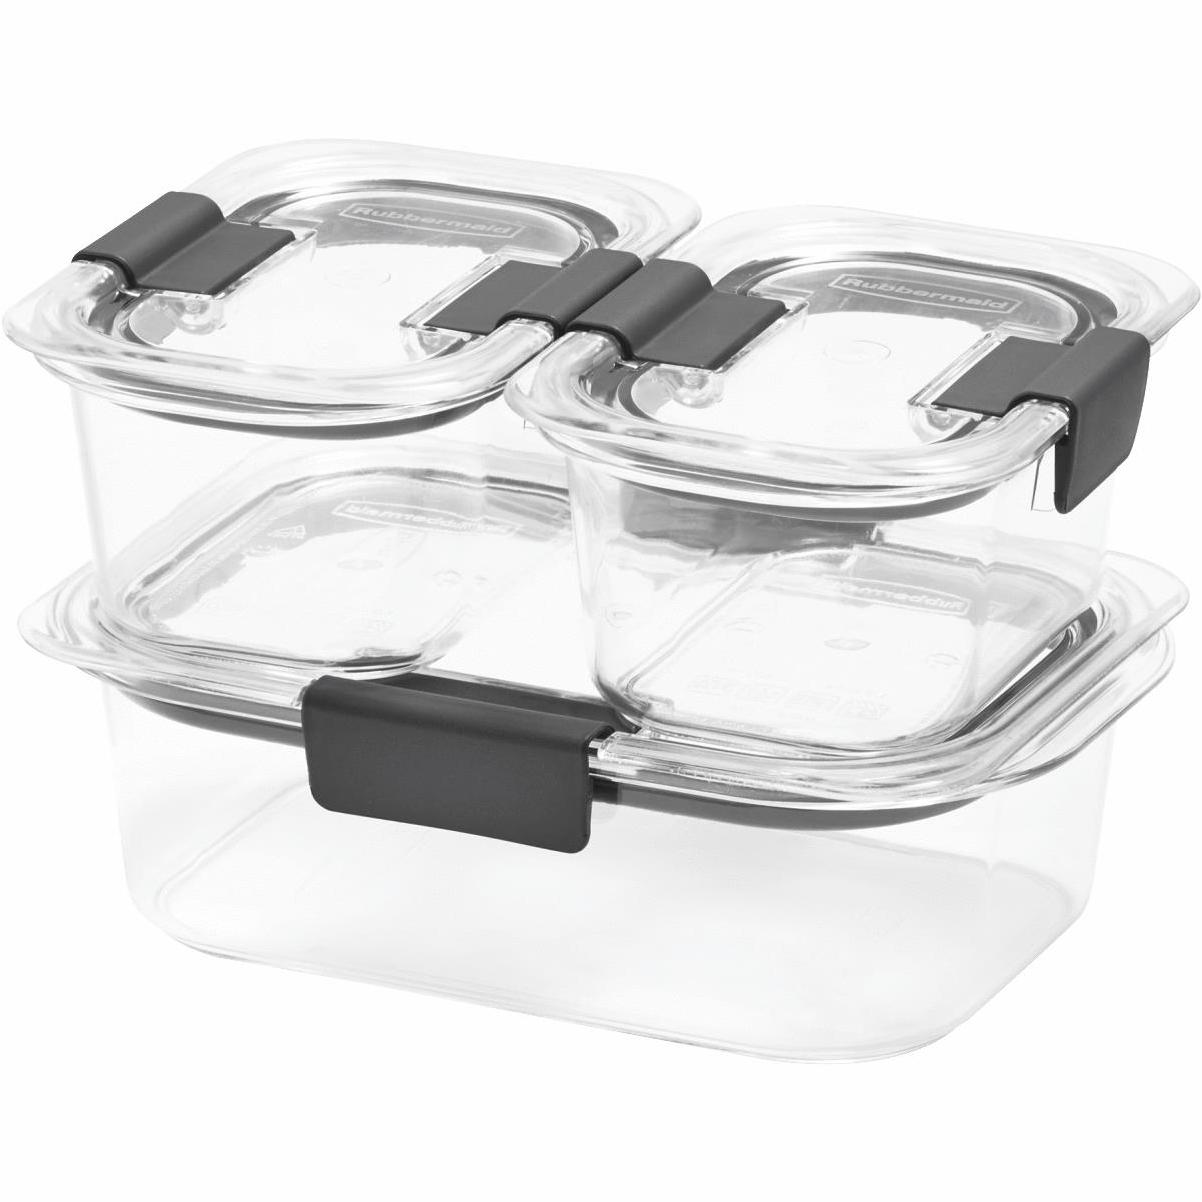 Rubbermaid Easy Find Lids 32 Pc Set With Vents, Food Storage, Household